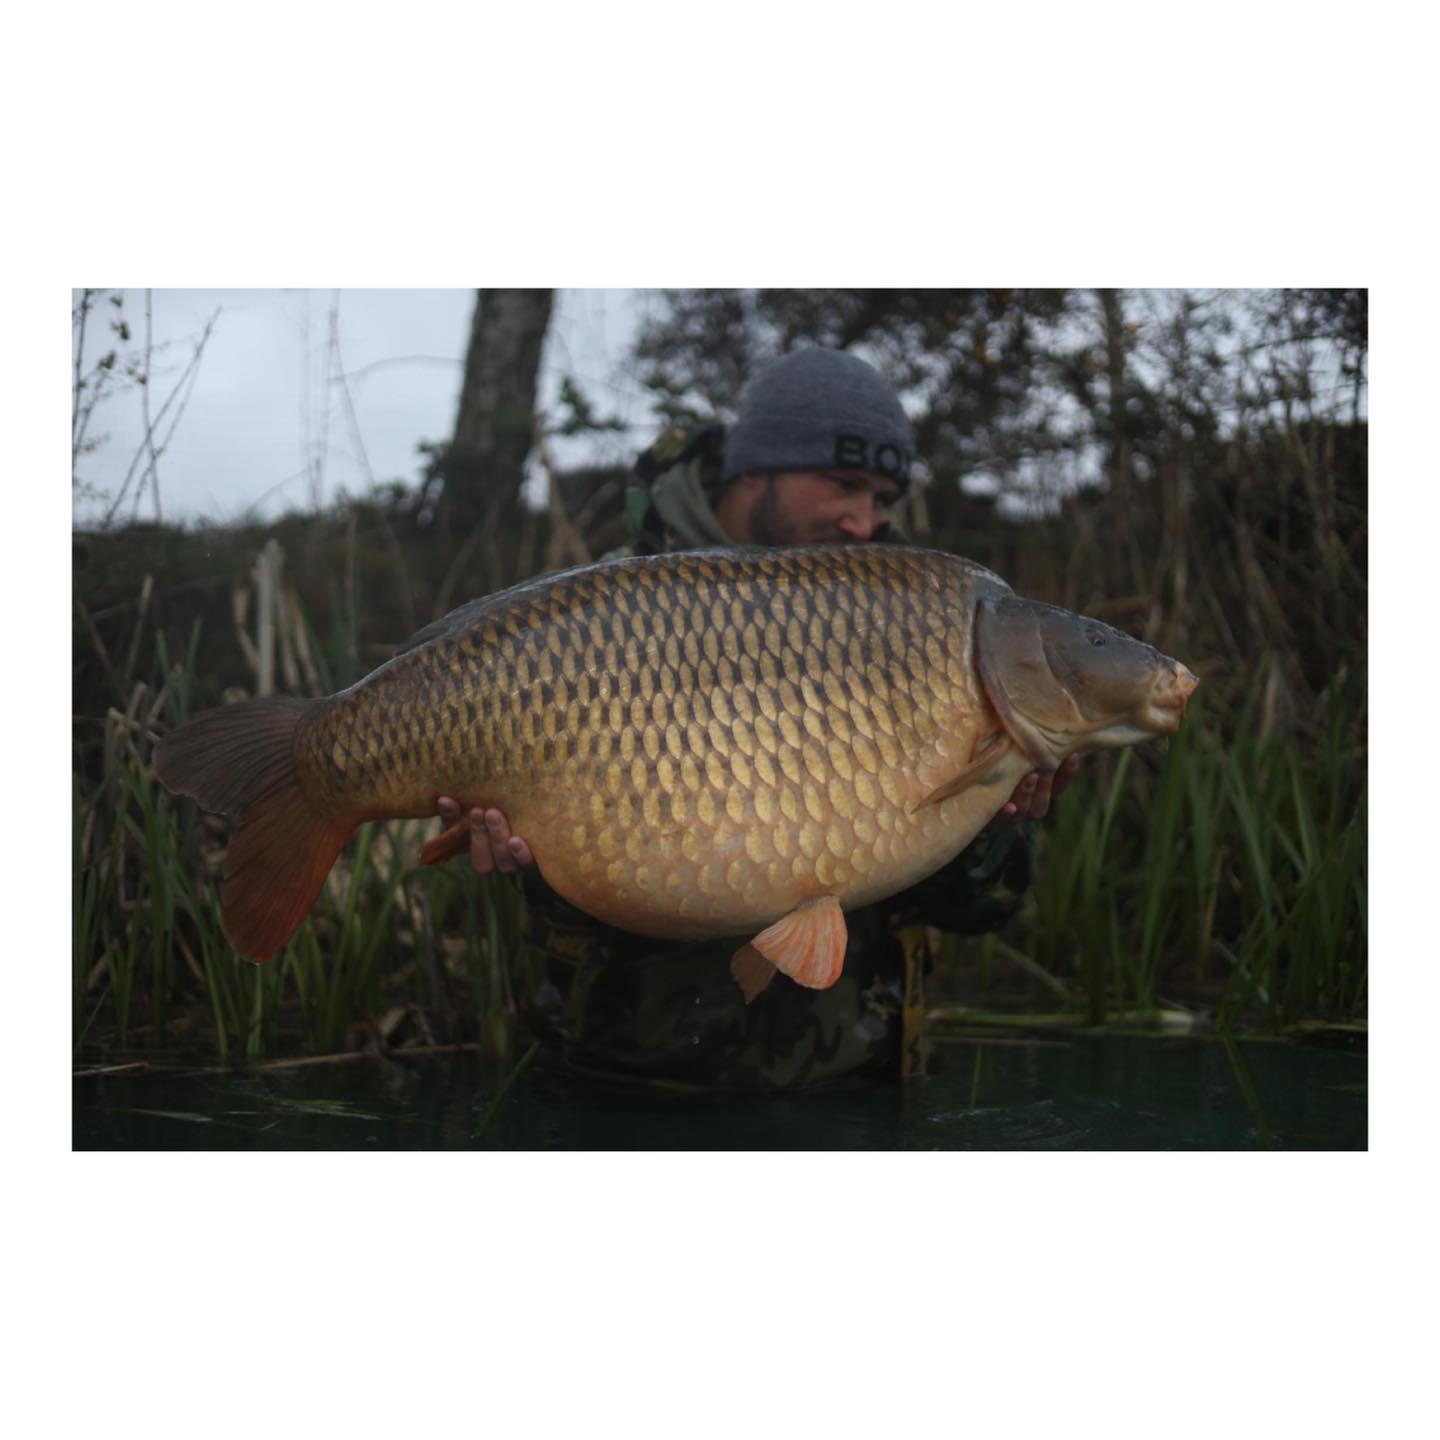 Old Mills Big Common – Liam Gingell